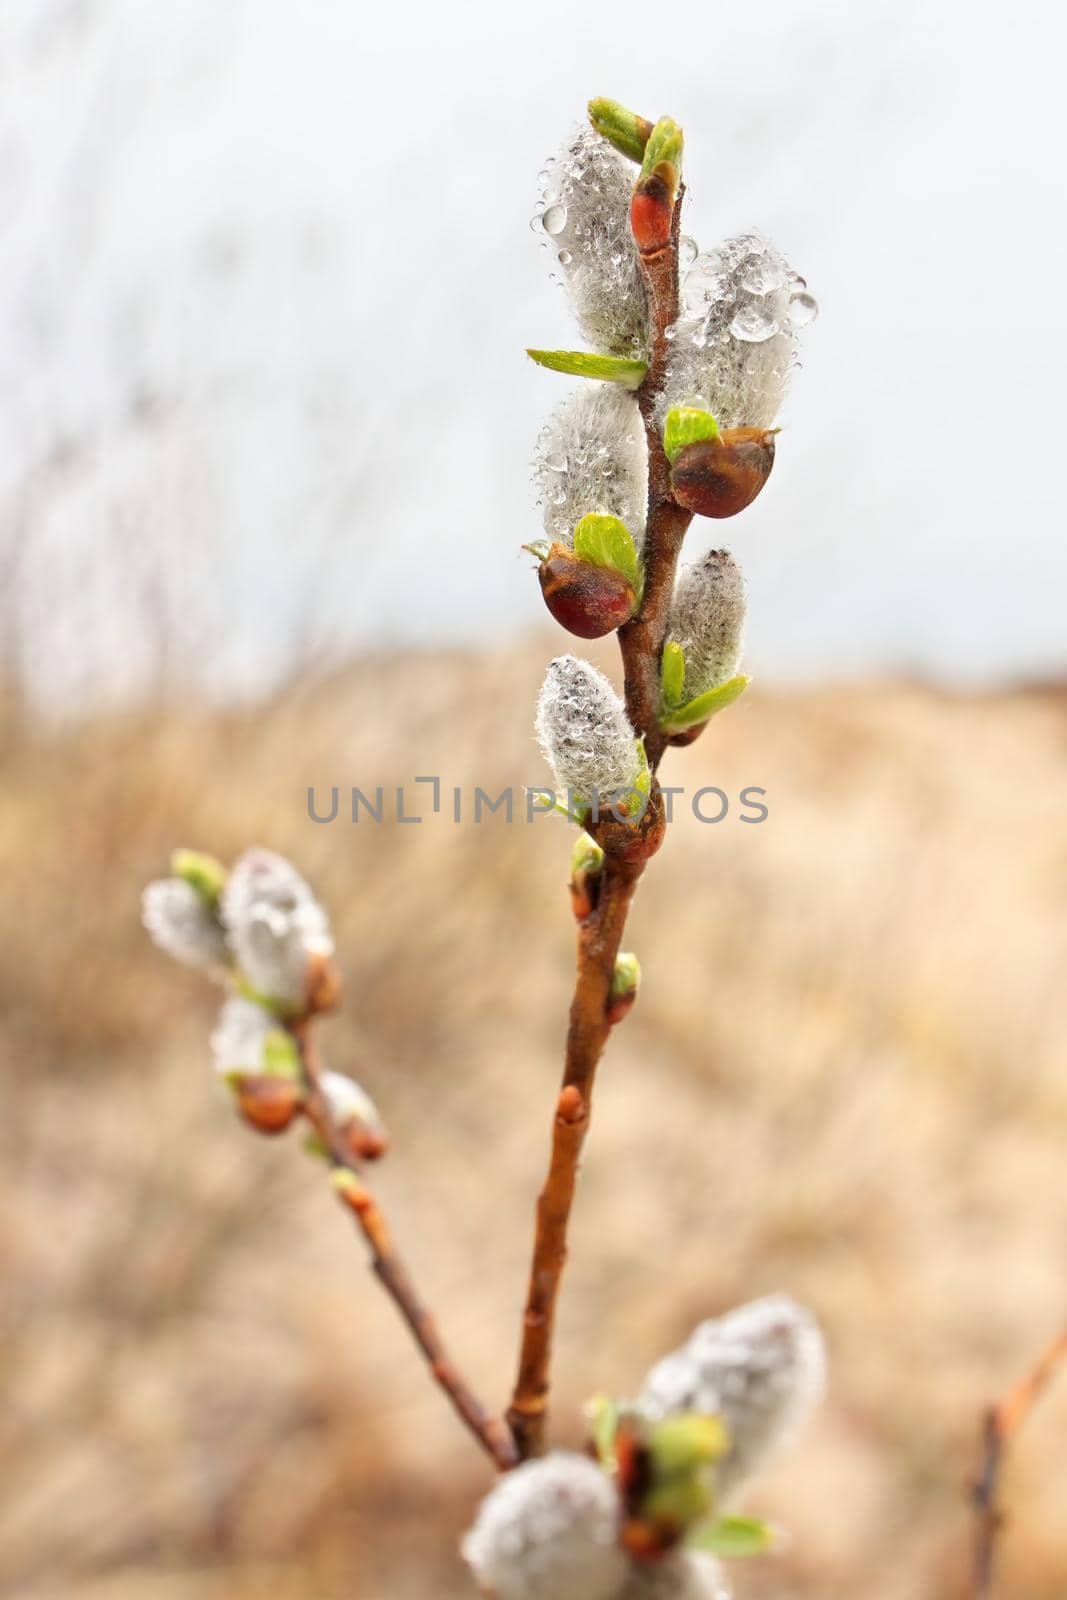 Pussy Willow Catkins Blooming in Spring Covered in Fresh Clear Raindrops. High quality photo